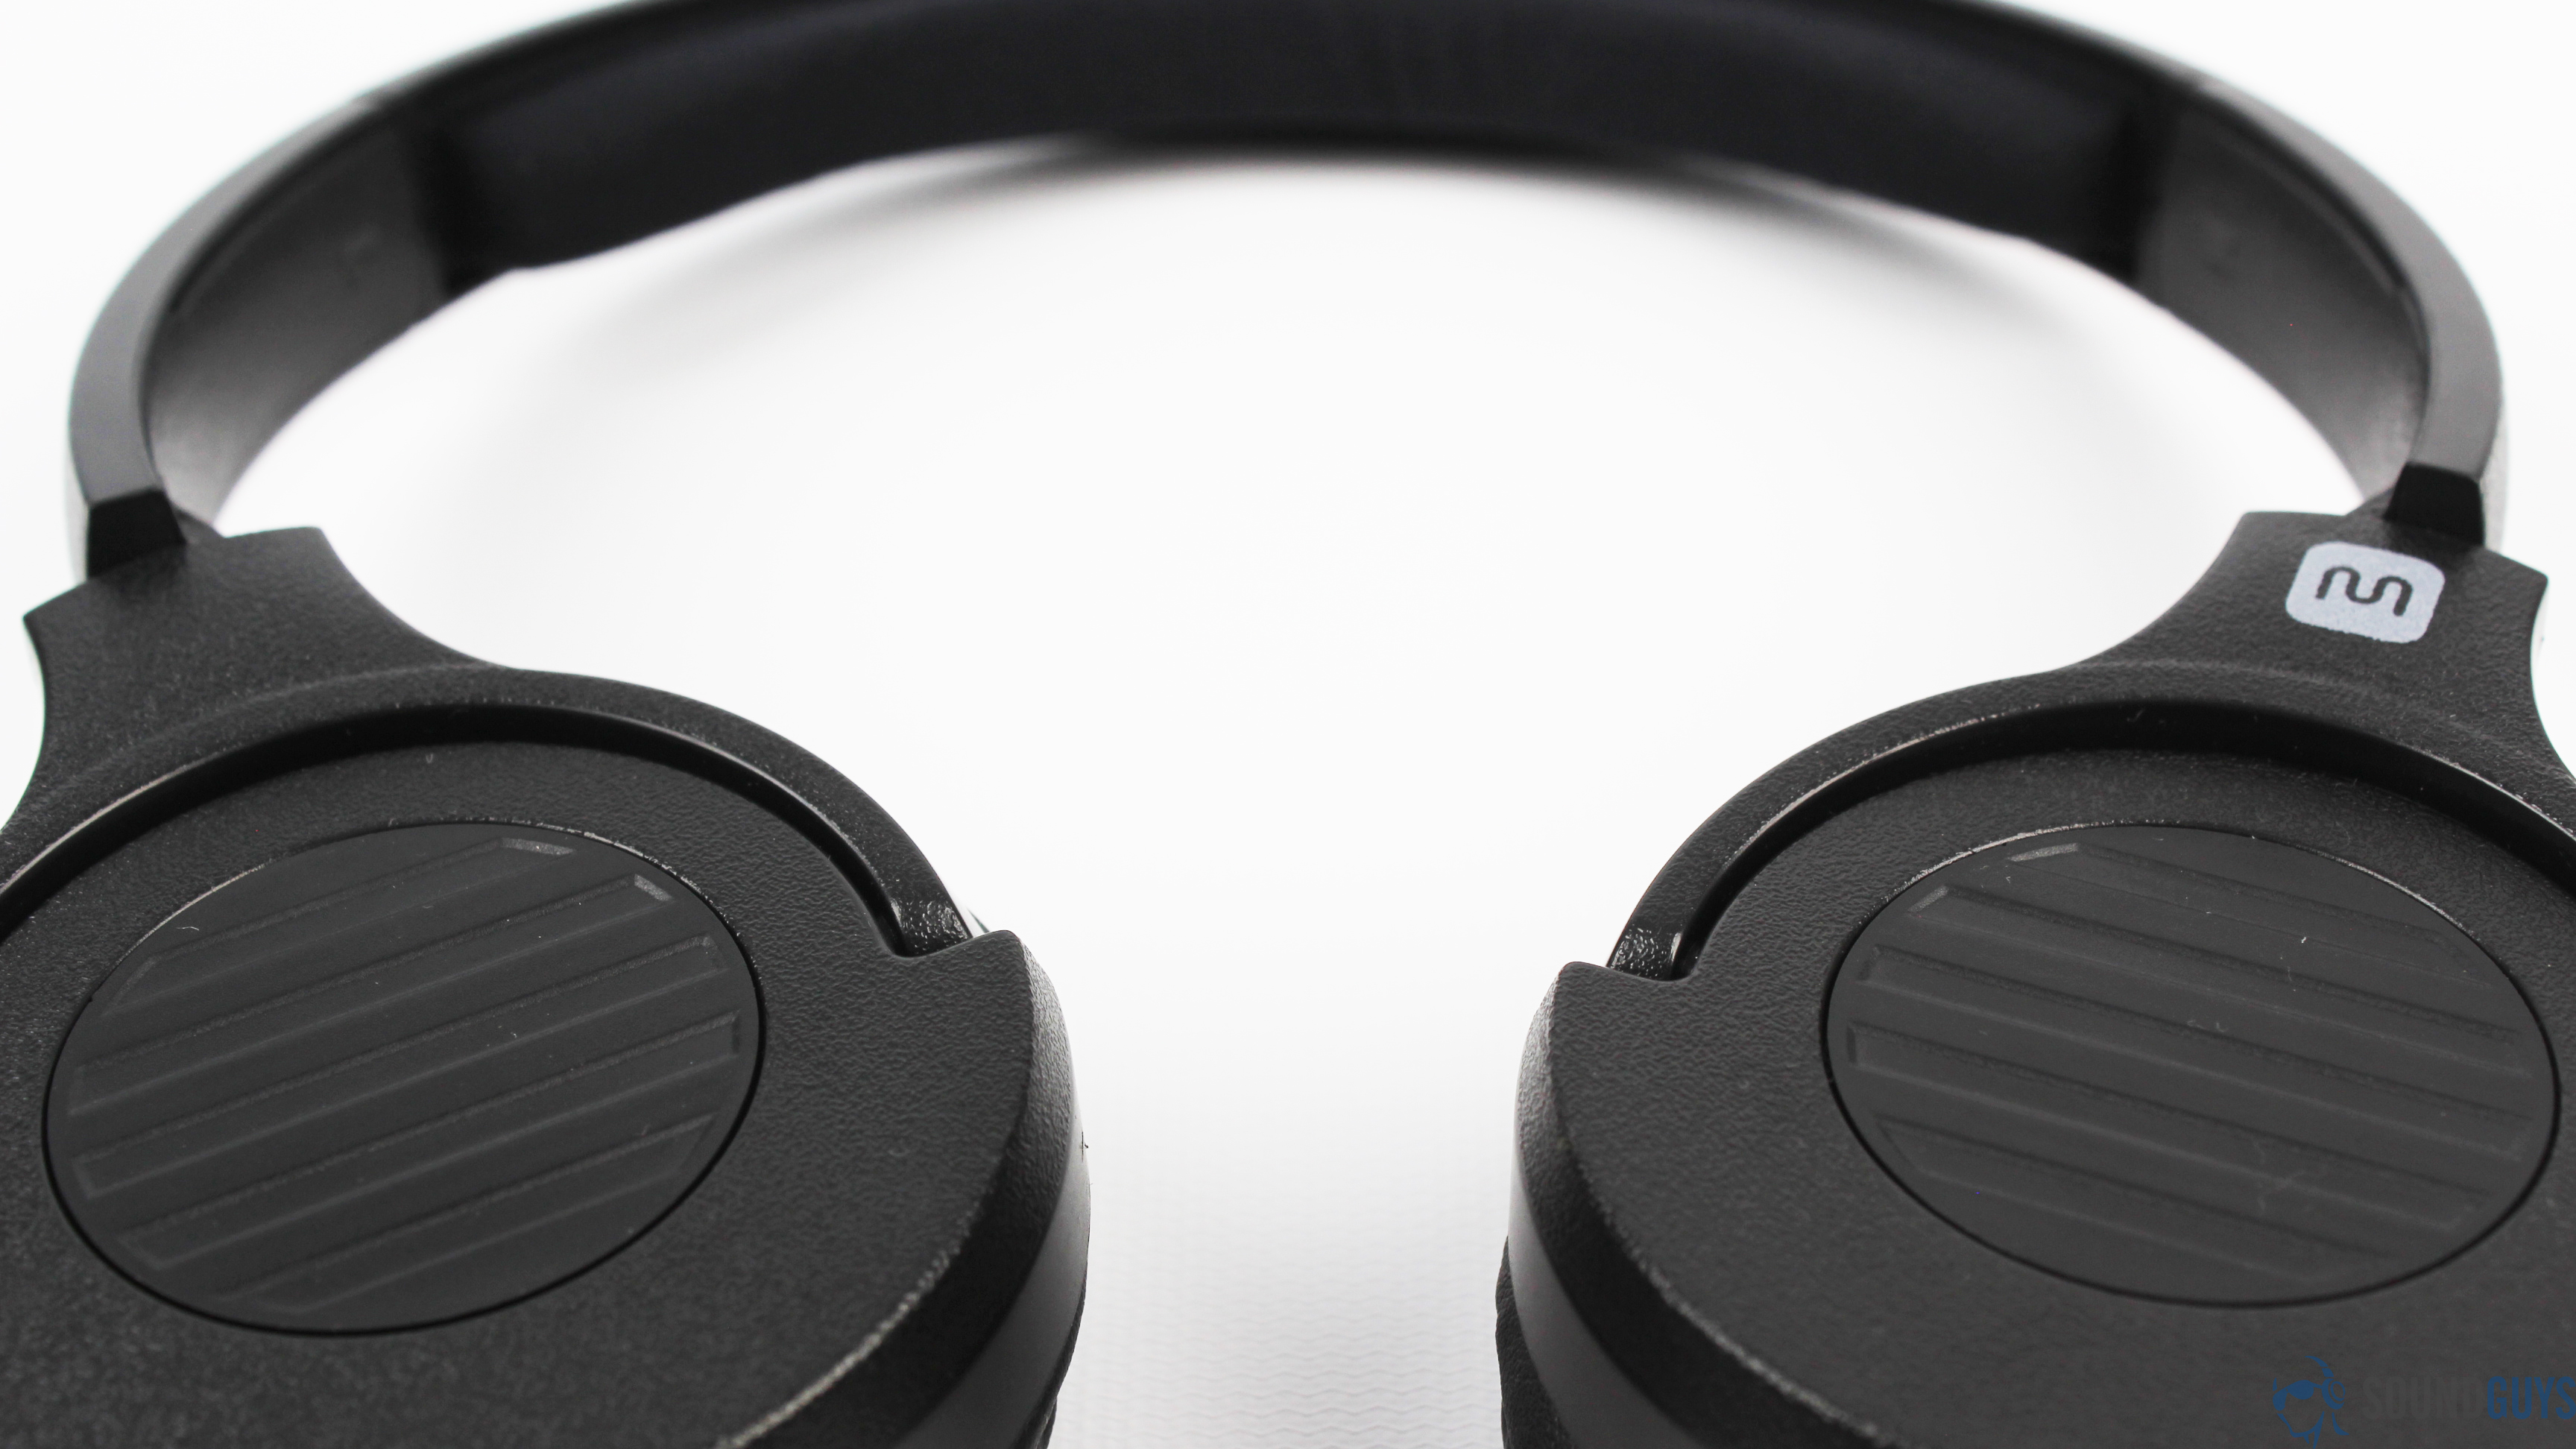 The Monoprice Hi-Fi On-Ear headphones in black against a white table.